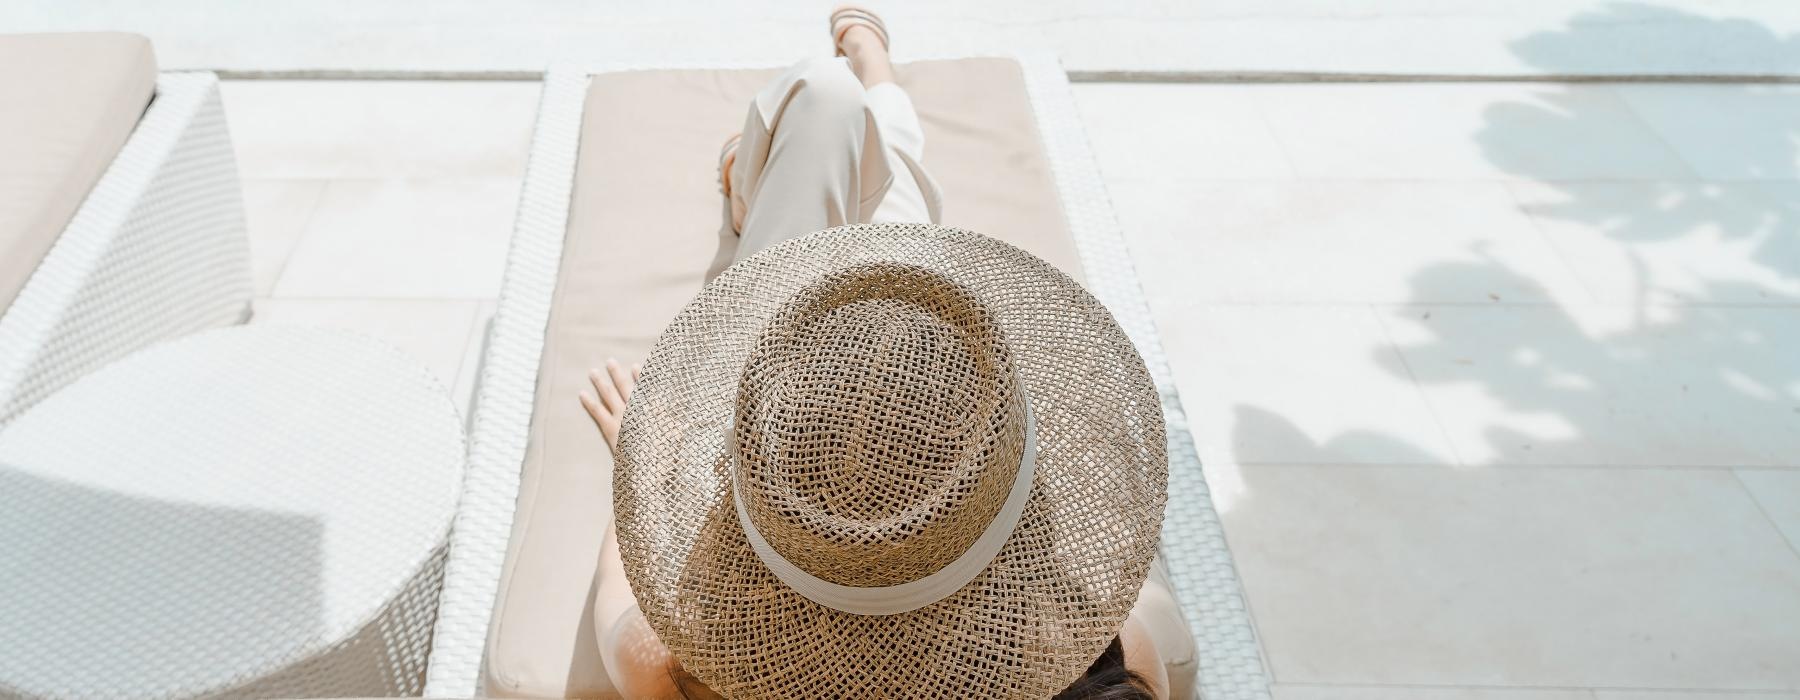 a person lying on a chair by a pool